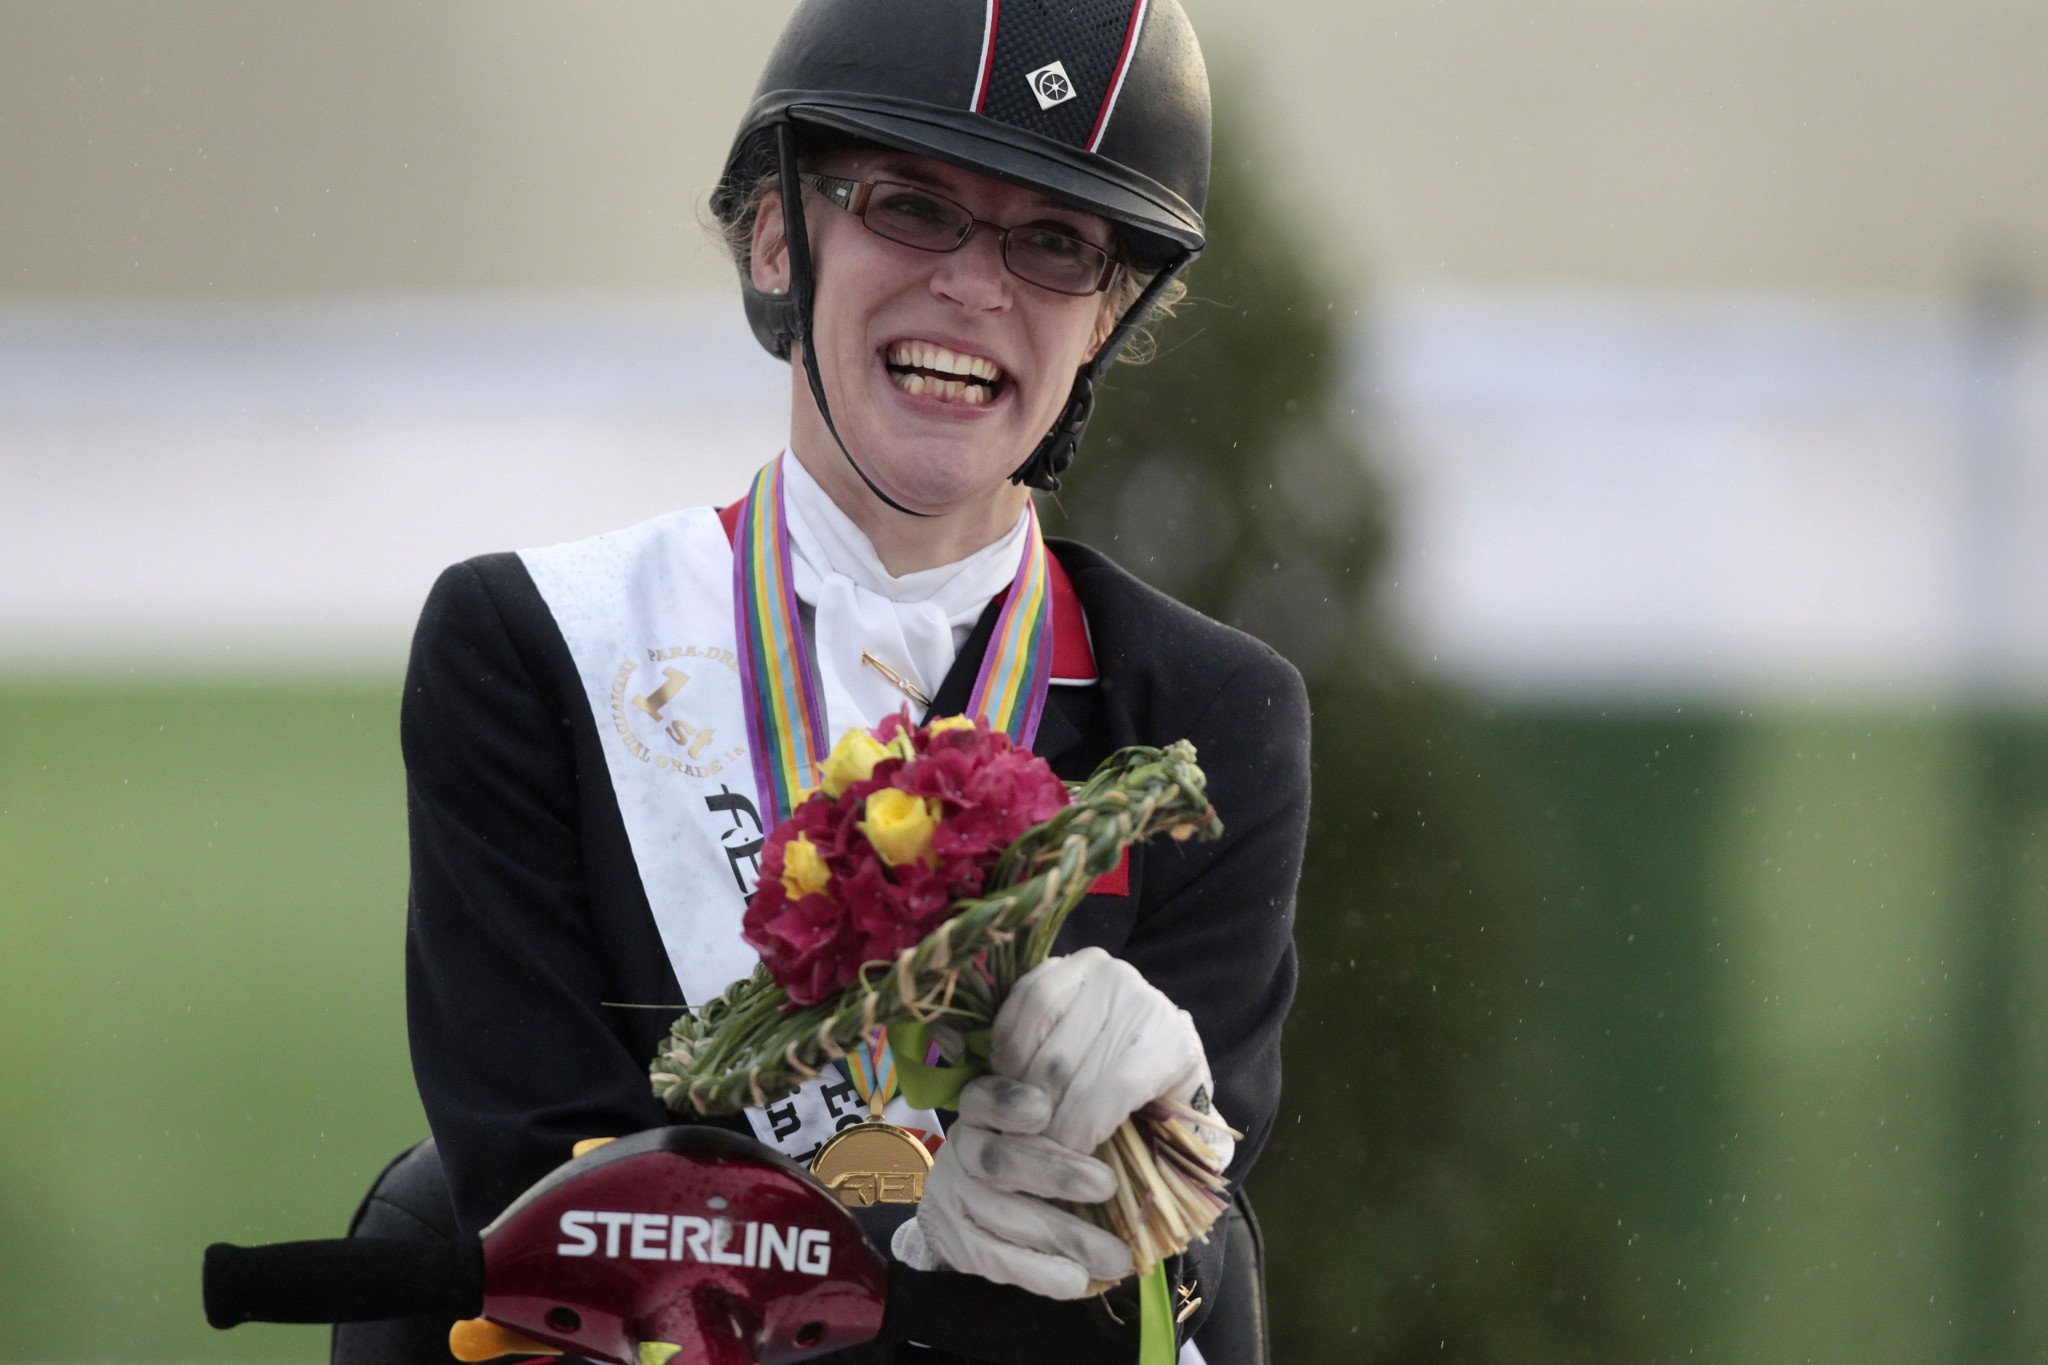 Britain's Paralympic dressage gold medallist Sophie Christiansen secured employment following London 2012 ©Getty Images